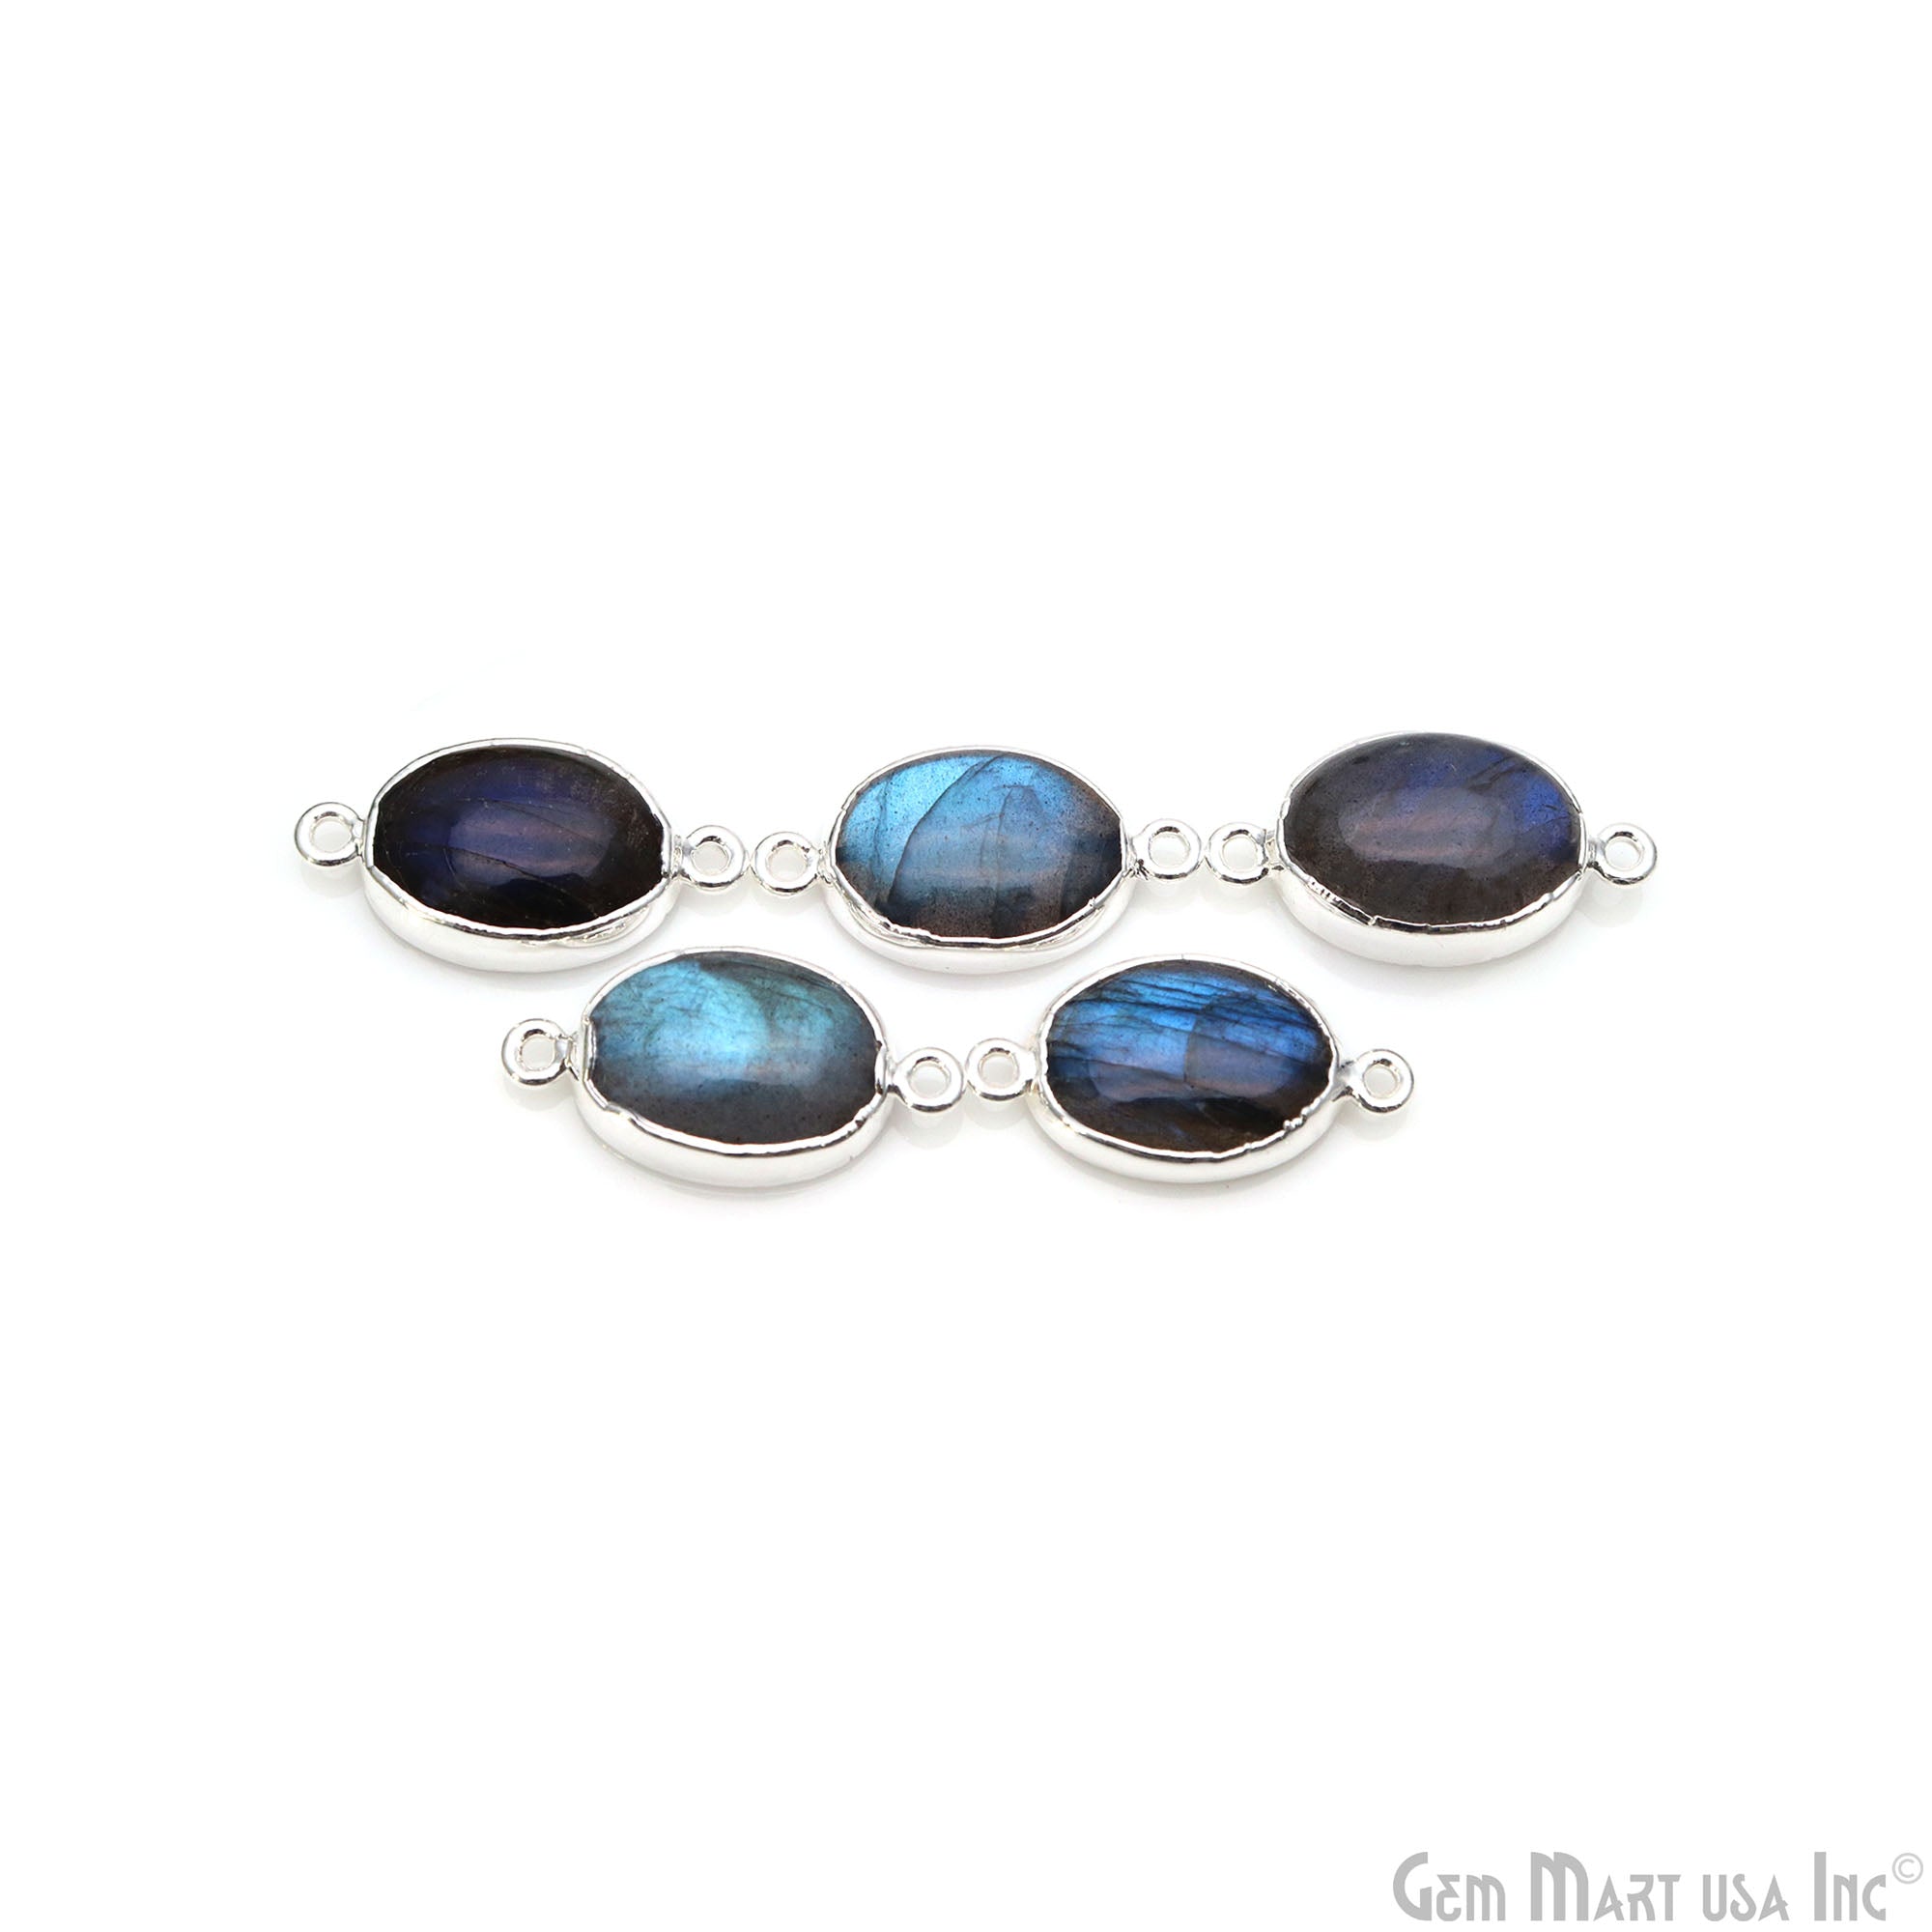 Flashy Labradorite 25x13mm Cabochon Oval Double Bail Silver Electroplated Gemstone Connector